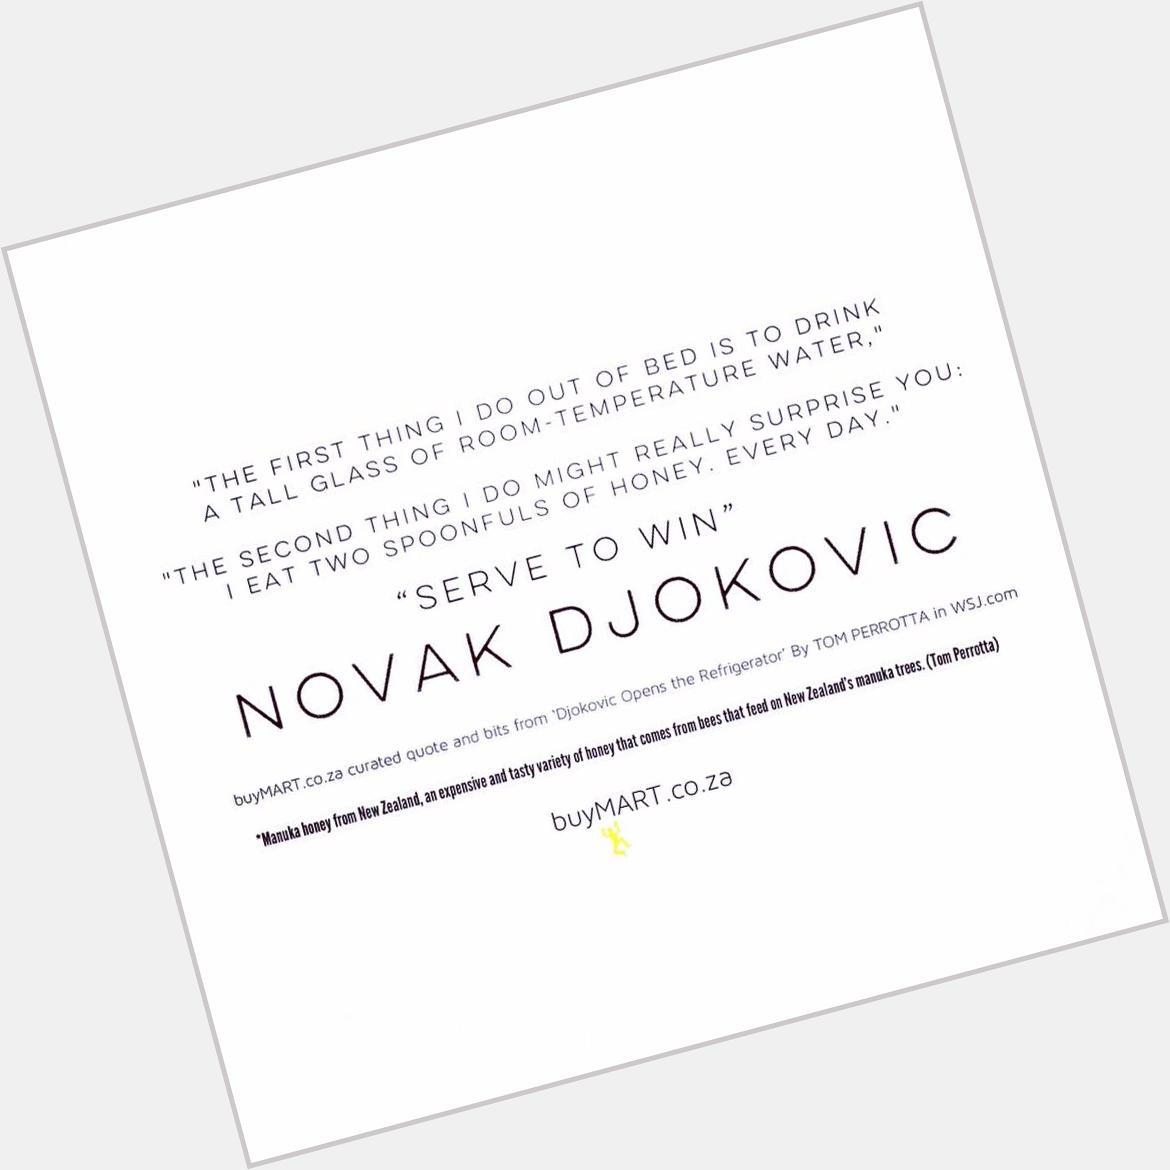 Happy Birthday Novak To serving us more moments Champ    